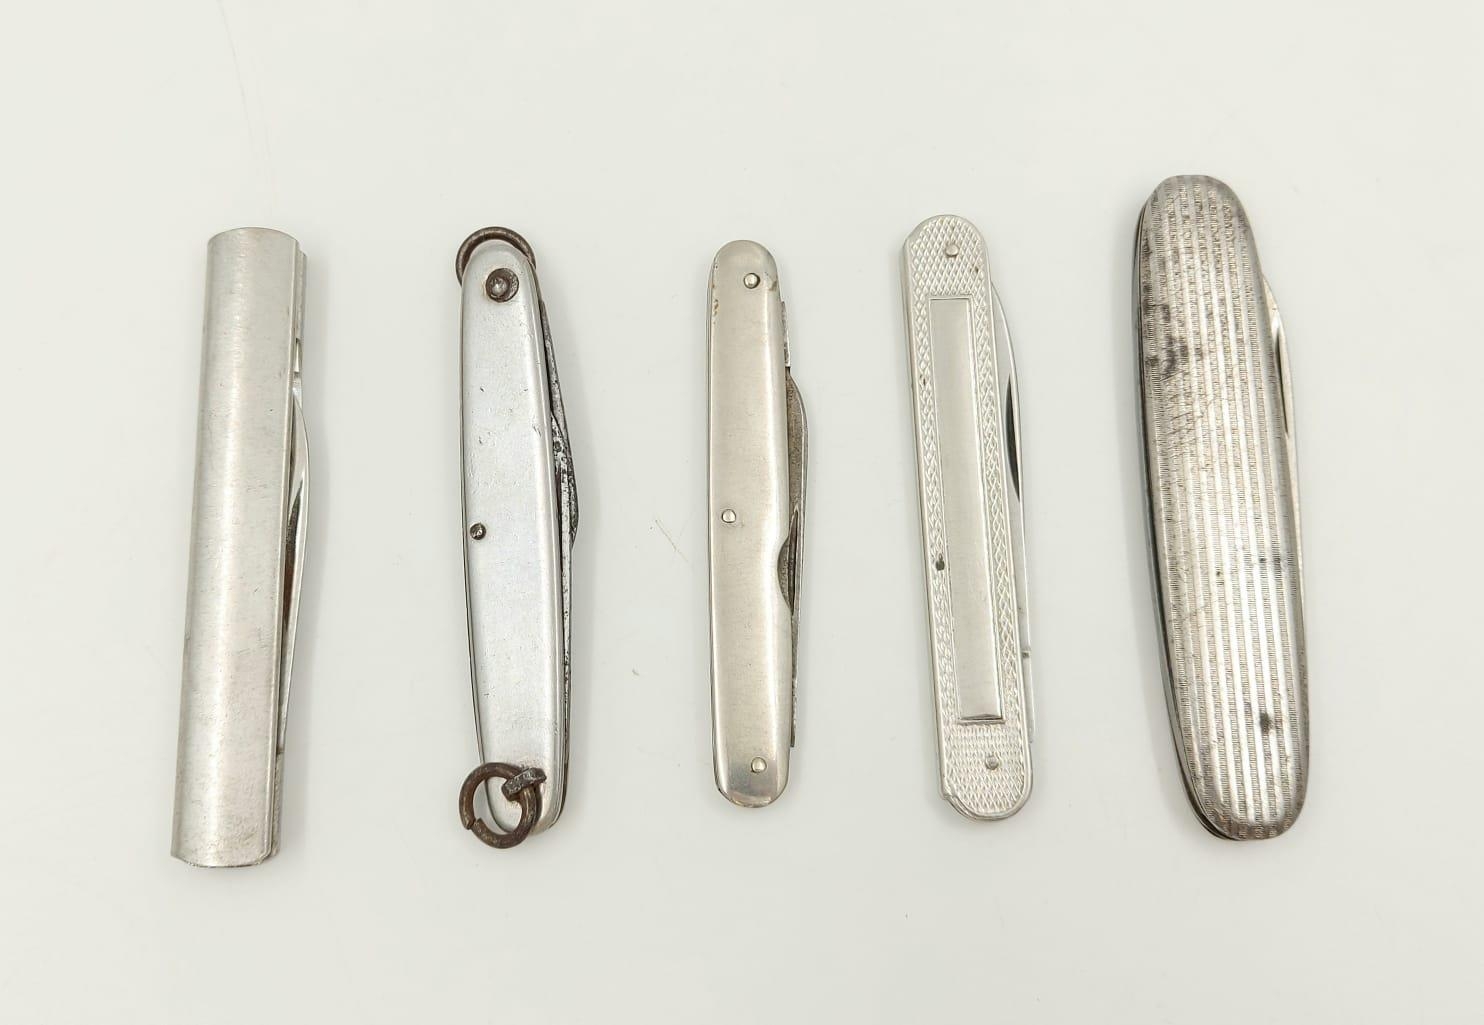 5 Vintage Stainless Steel Penknives, 4 Sheffield made and 1 German Made